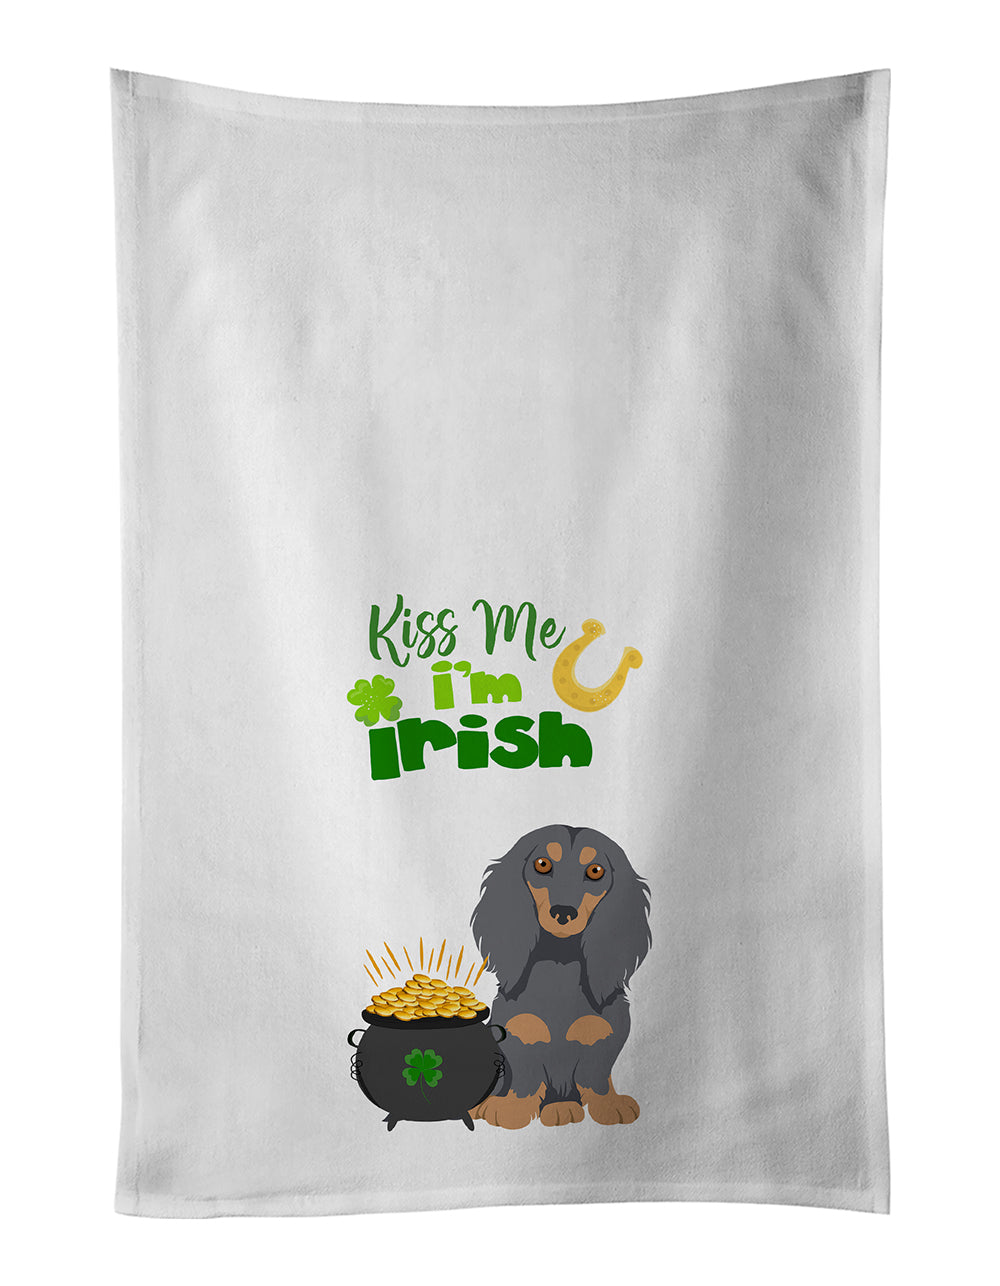 Buy this Longhair Blue and Tan Dachshund St. Patrick's Day White Kitchen Towel Set of 2 Dish Towels